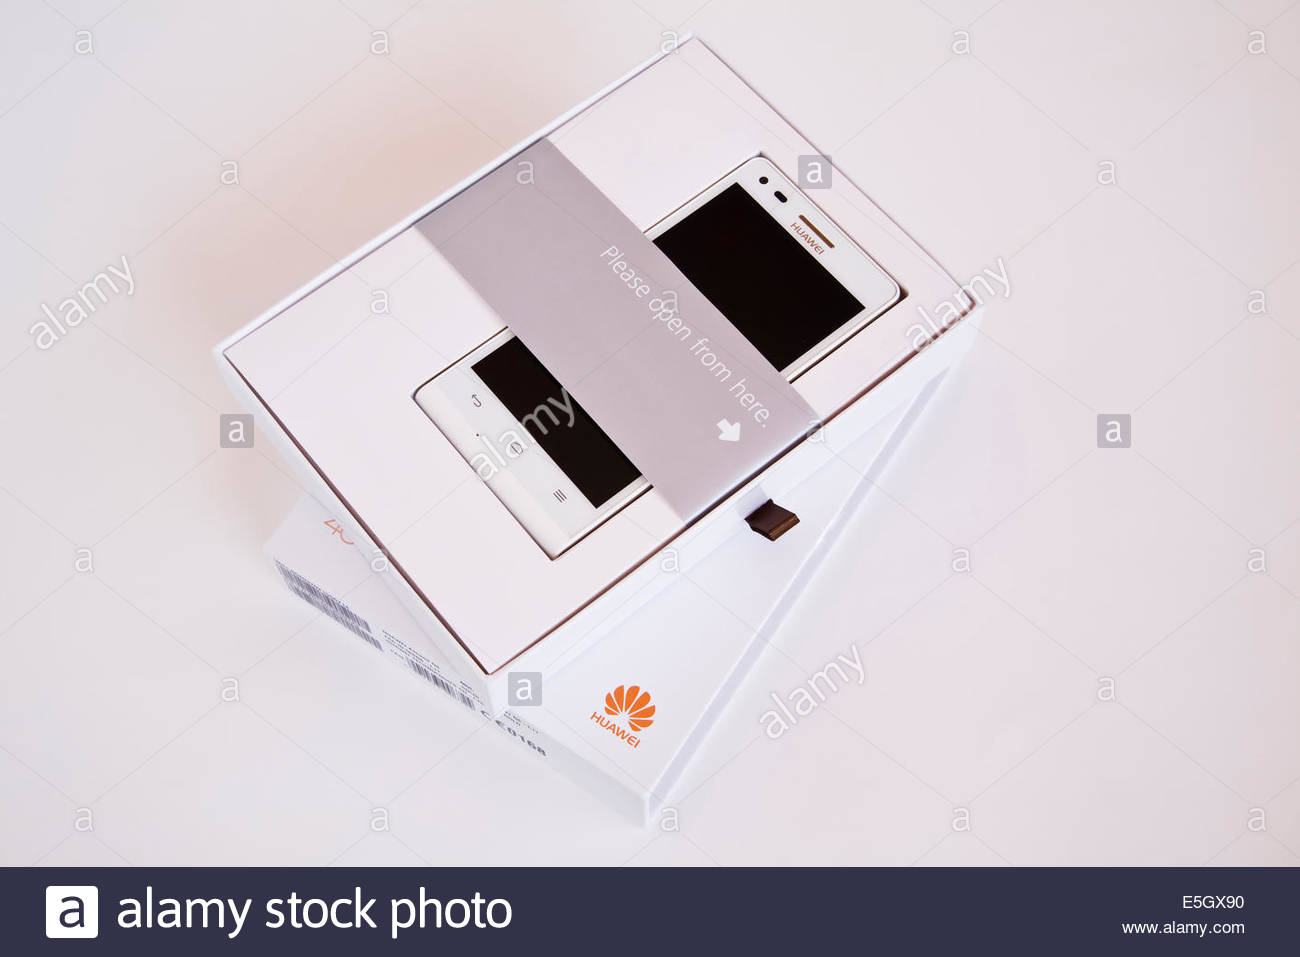 Huawei Ascend G6 mobile phone and accessories with packaging Stock Photo -  Alamy